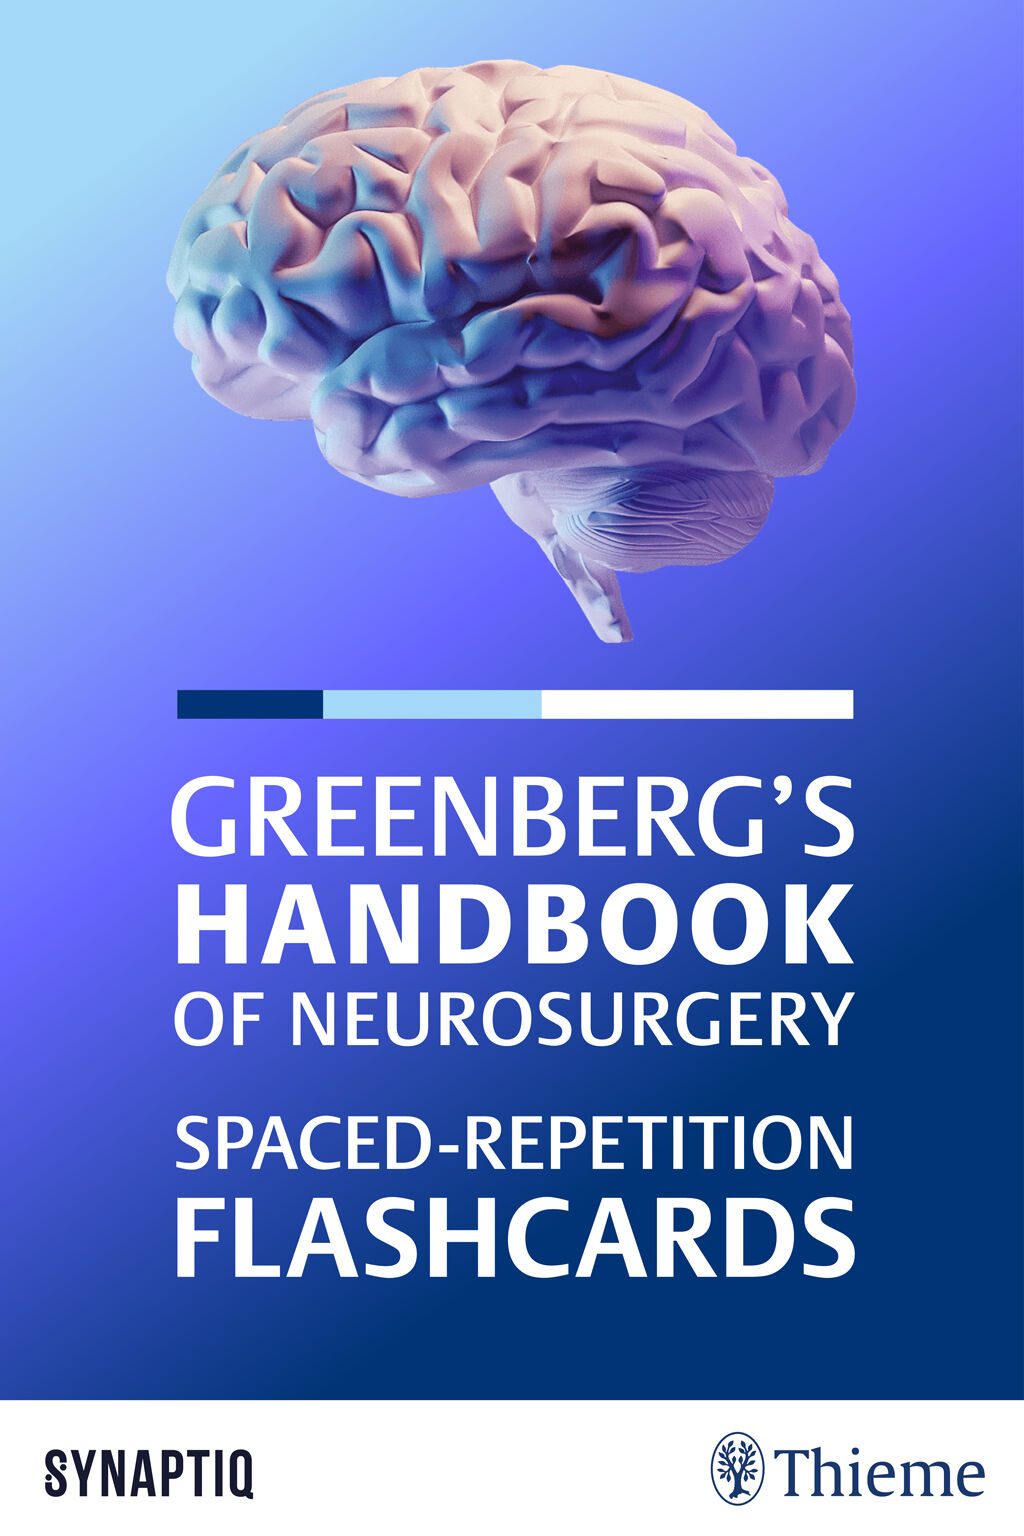 Greenberg’s Neurosurgery Spaced-Repetition Flashcards, 000000000325470101